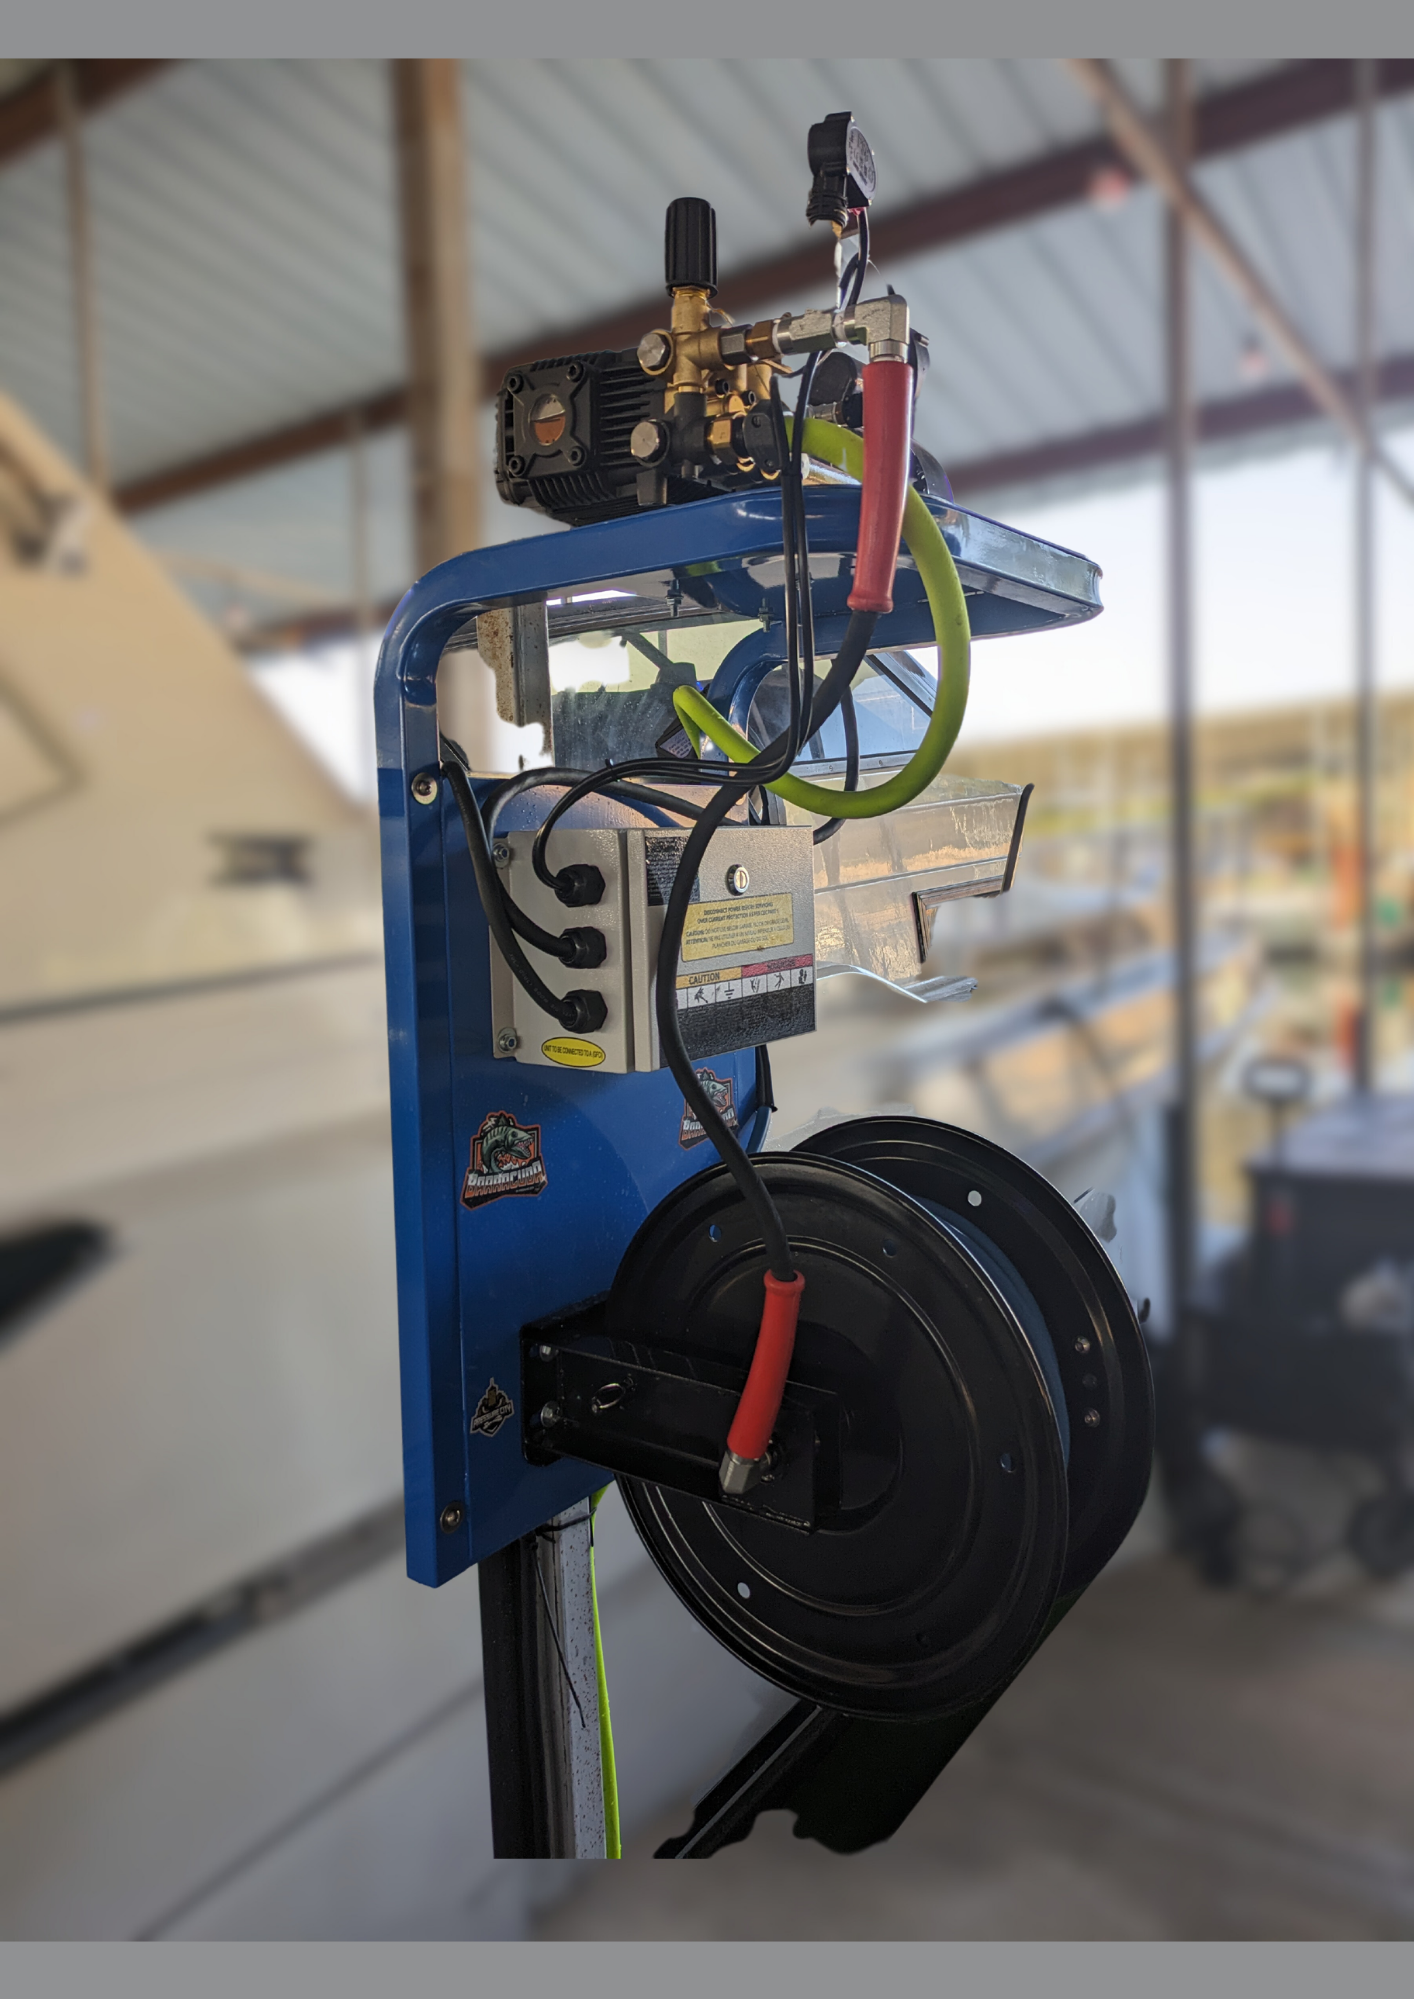 Dock or Garage Mounted Pressure Washer - Ideal for Boat and